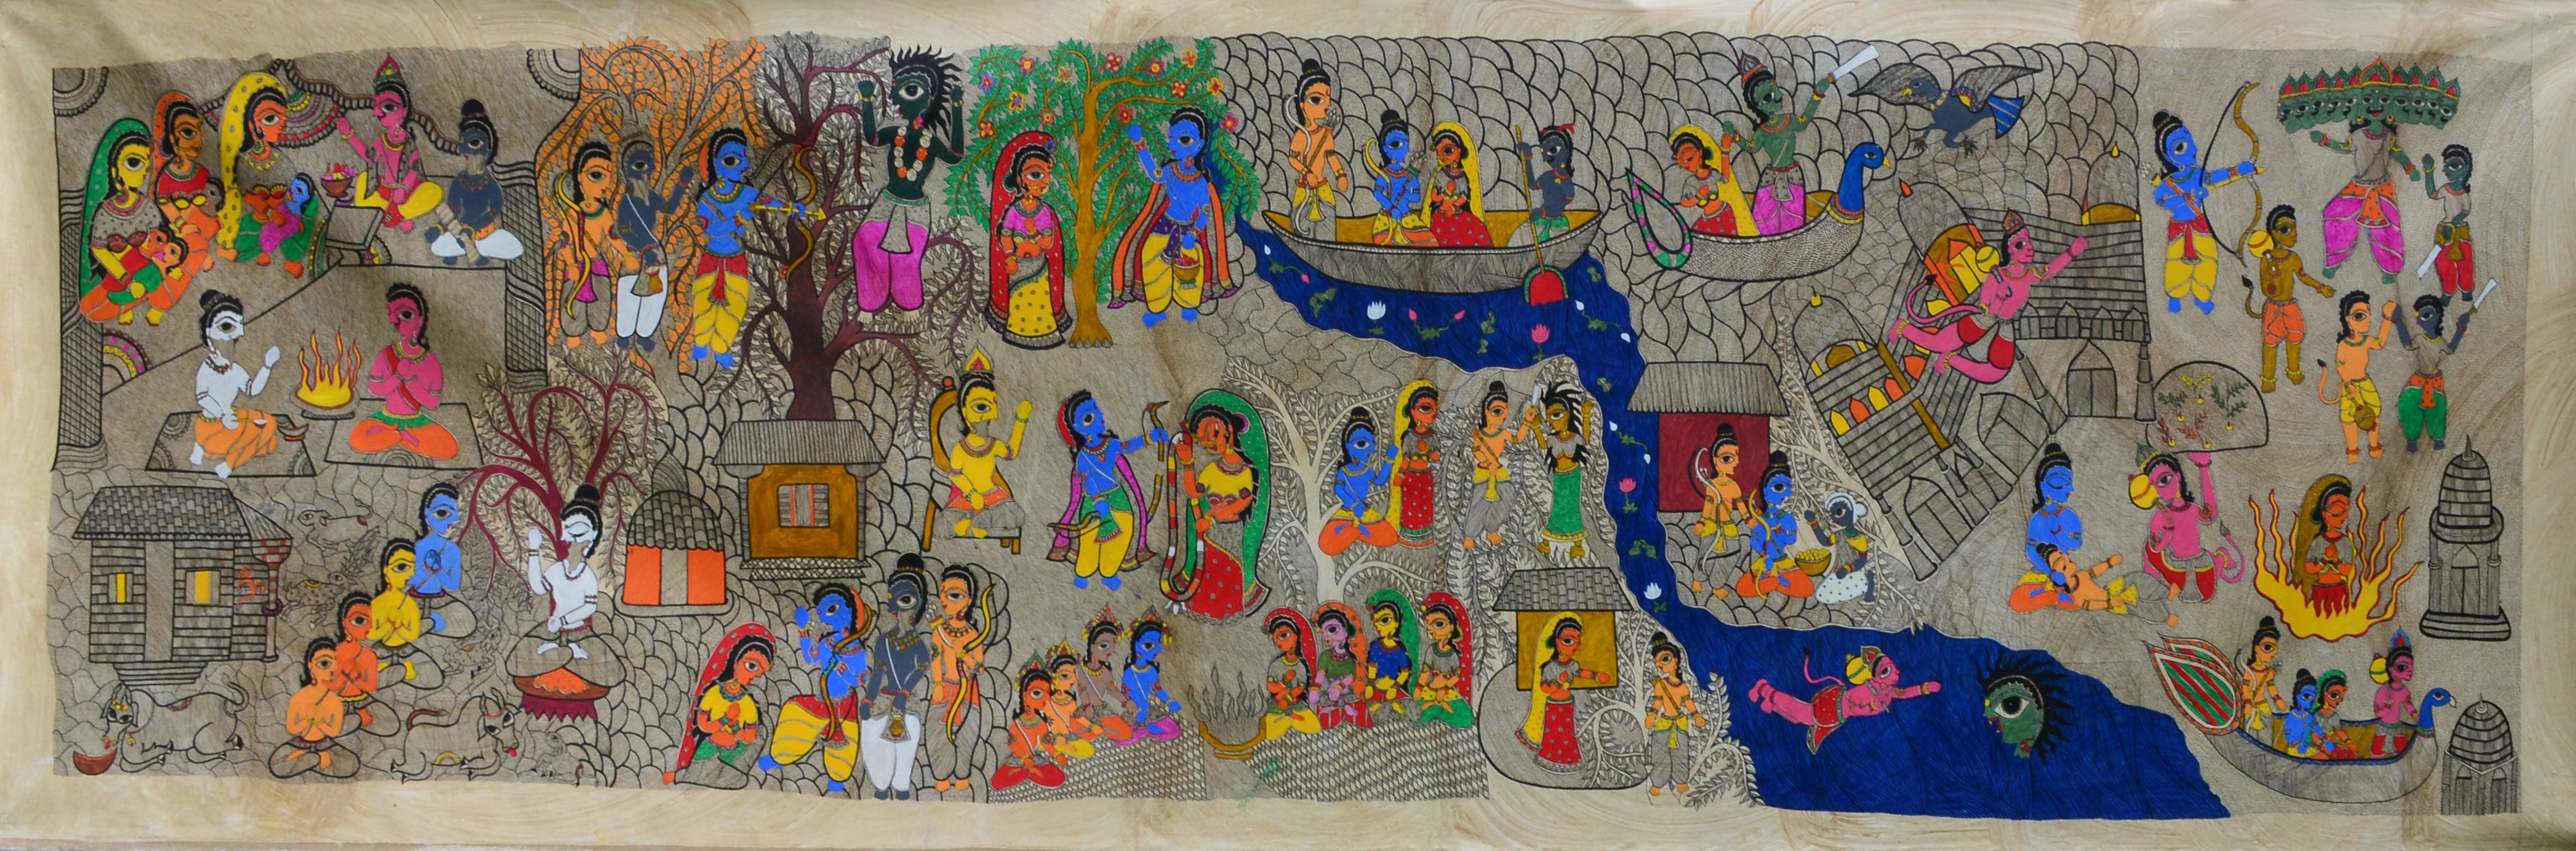 A Kumar Jha,The Story of Ramayan, Ink and Organic Paint on Canvas, 57x185 Inches, 2020